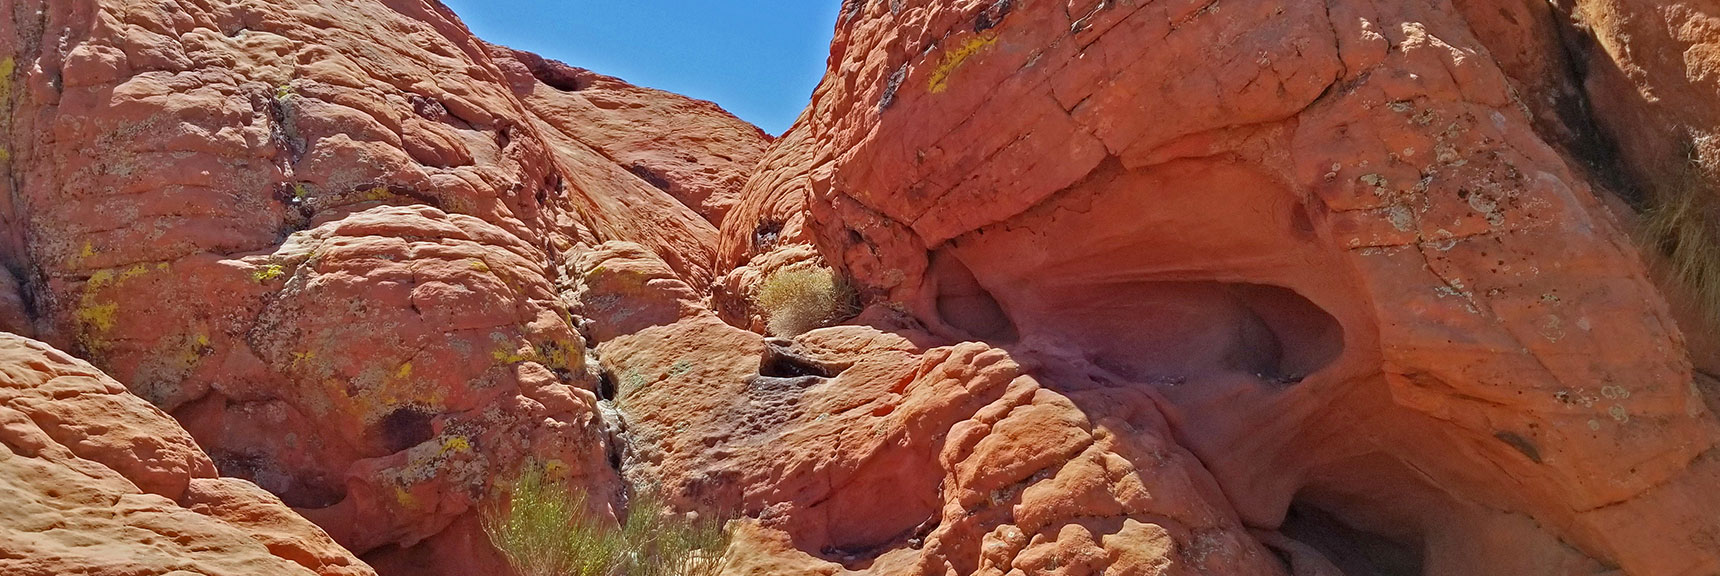 Niches and Gullys in Red Rock Formations | Little Red Rock Las Vegas, Nevada, Near La Madre Mountains Wilderness